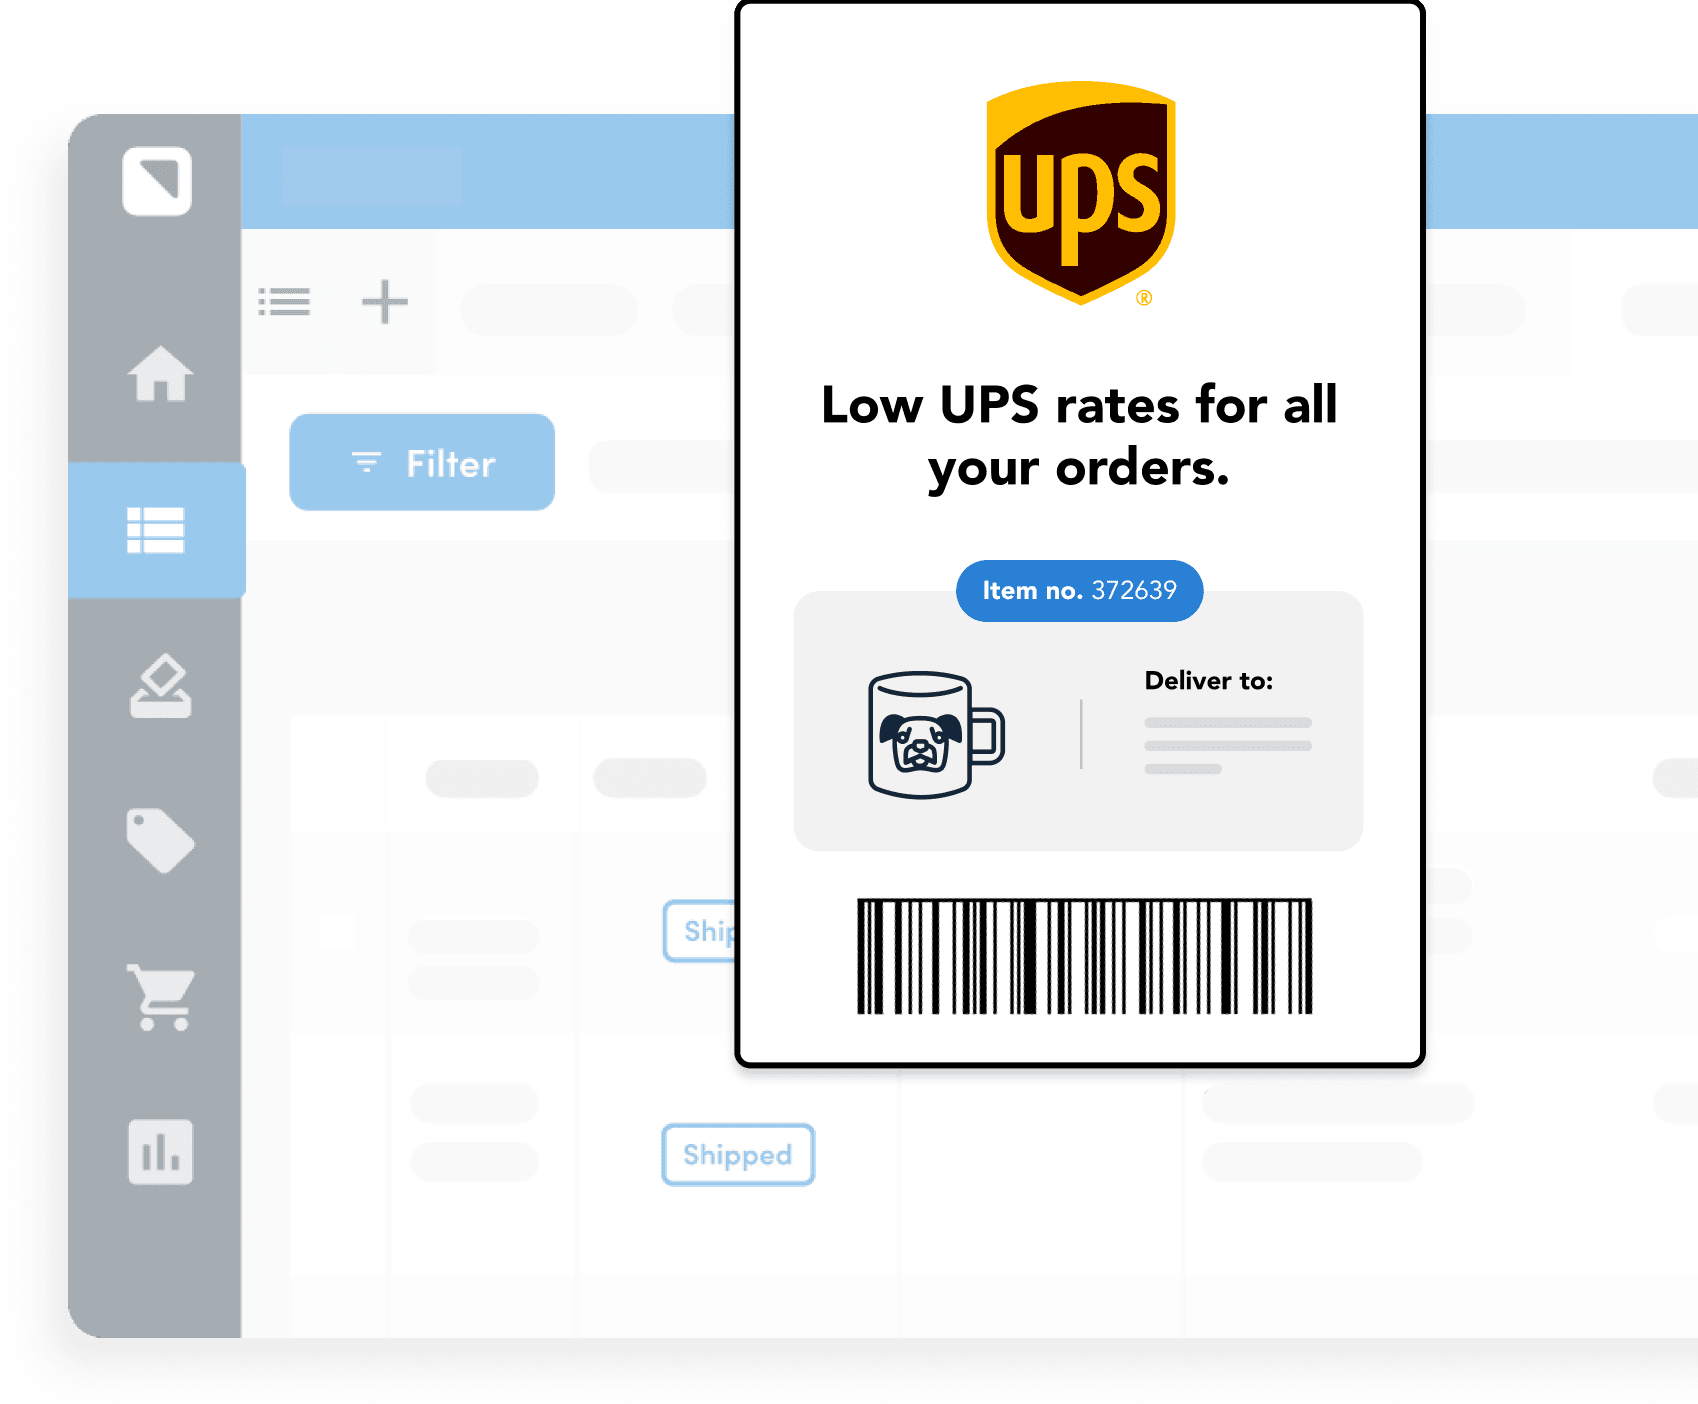 Immediate access to UPS discounted rates